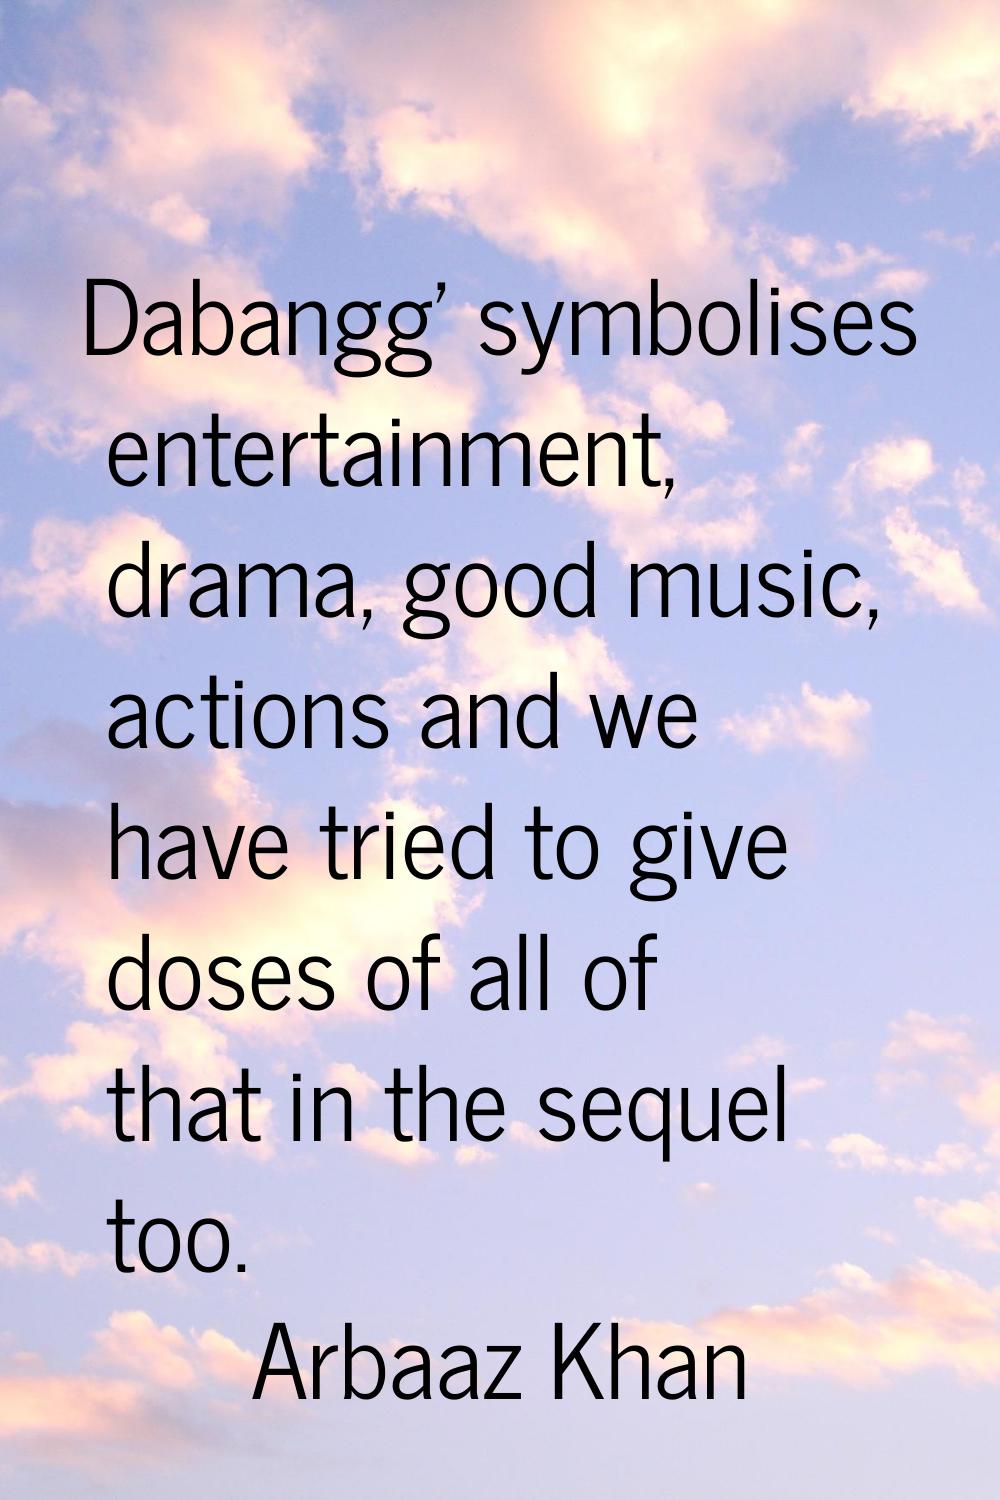 Dabangg' symbolises entertainment, drama, good music, actions and we have tried to give doses of al